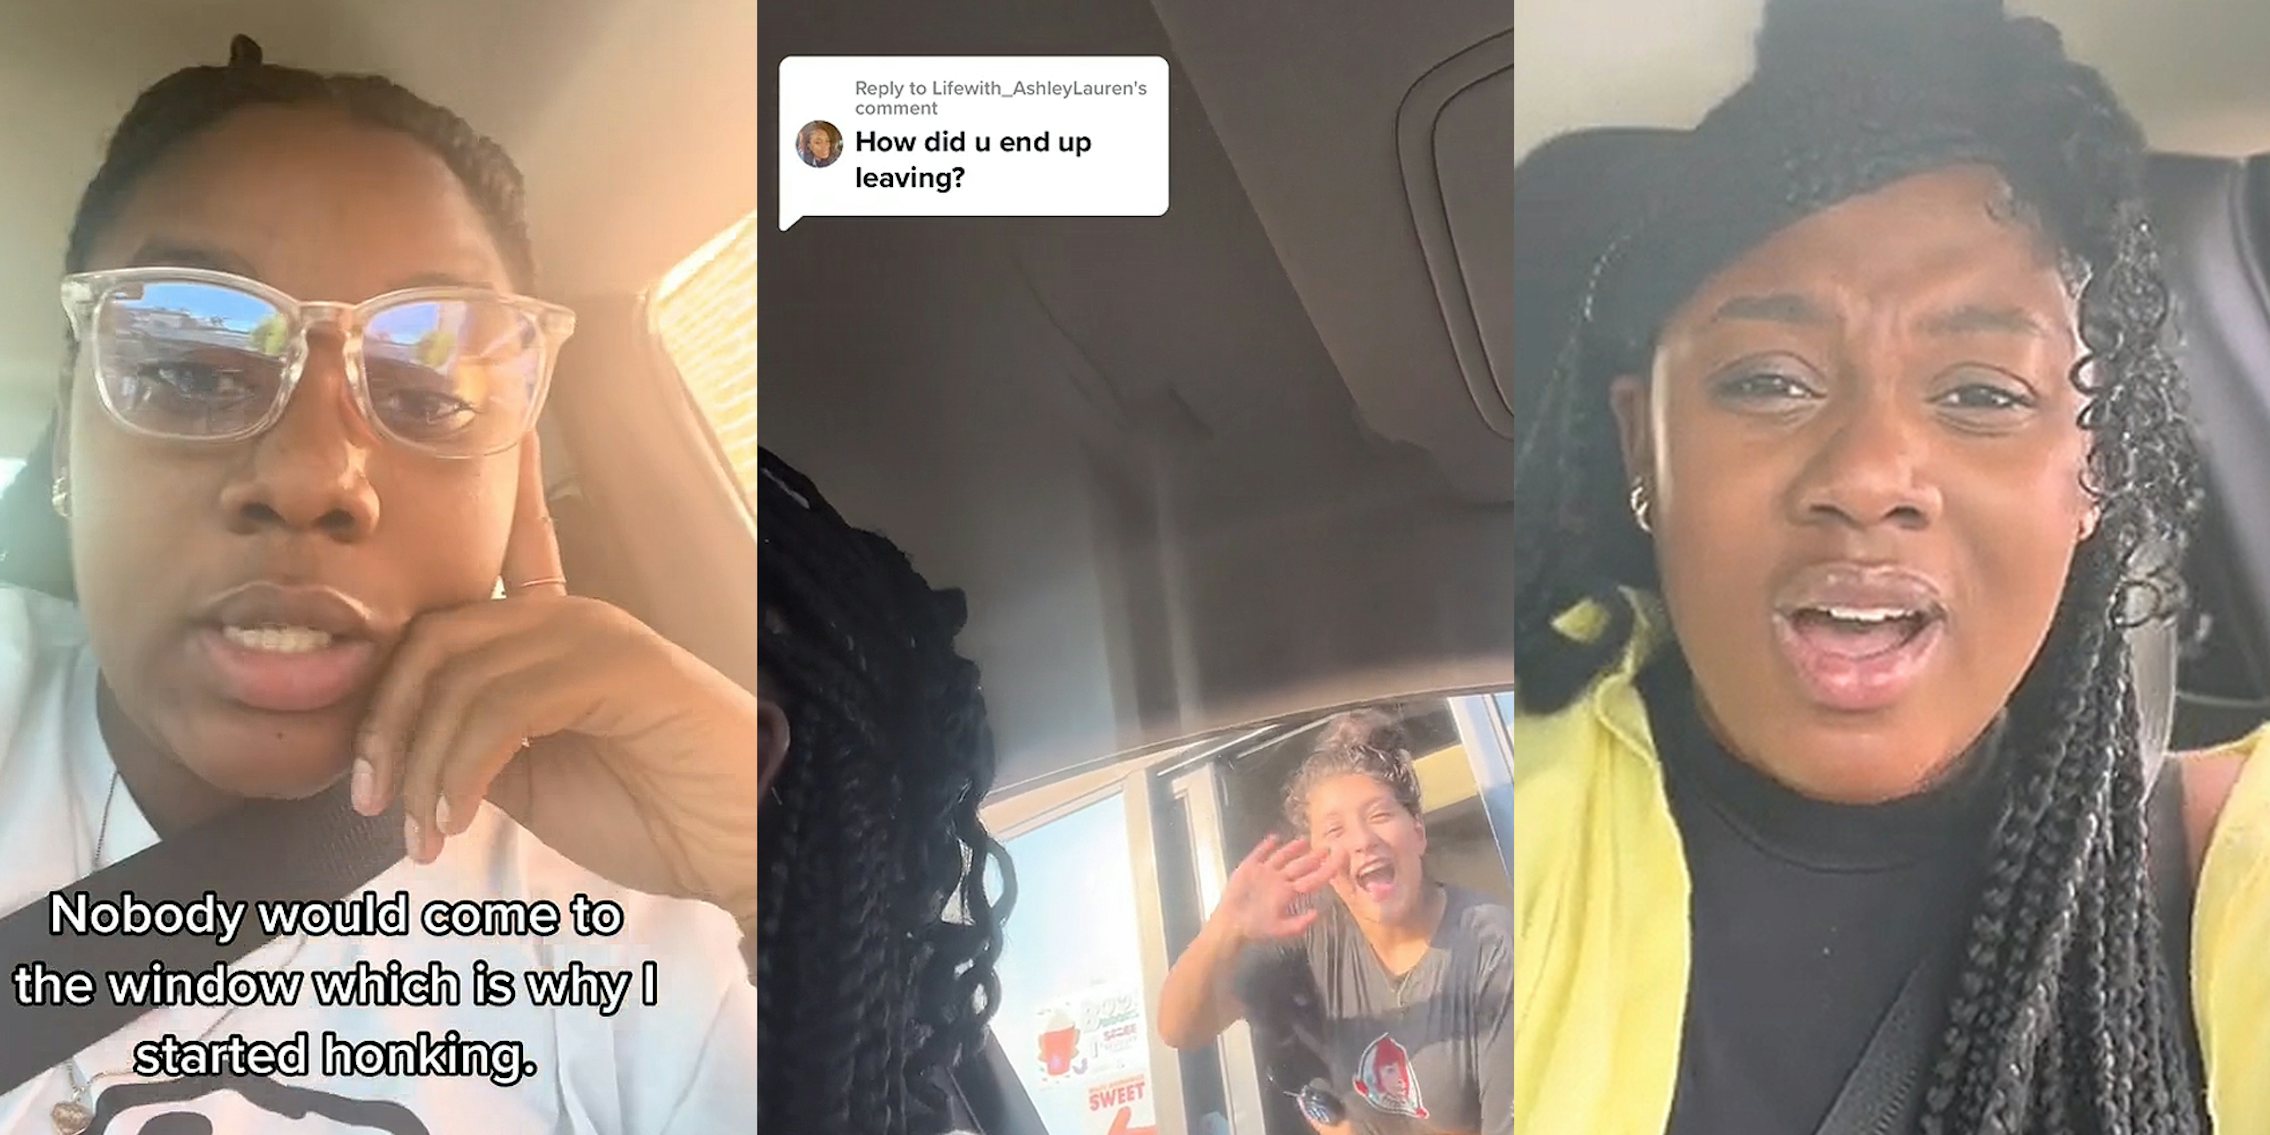 woman speaking in car hand on cheek caption 'Nobody would come to the window which is why I started honking.' (l) Wendy's worker smiling and waving through window as woman in car is speaking to police (c) woman speaking in car (r)